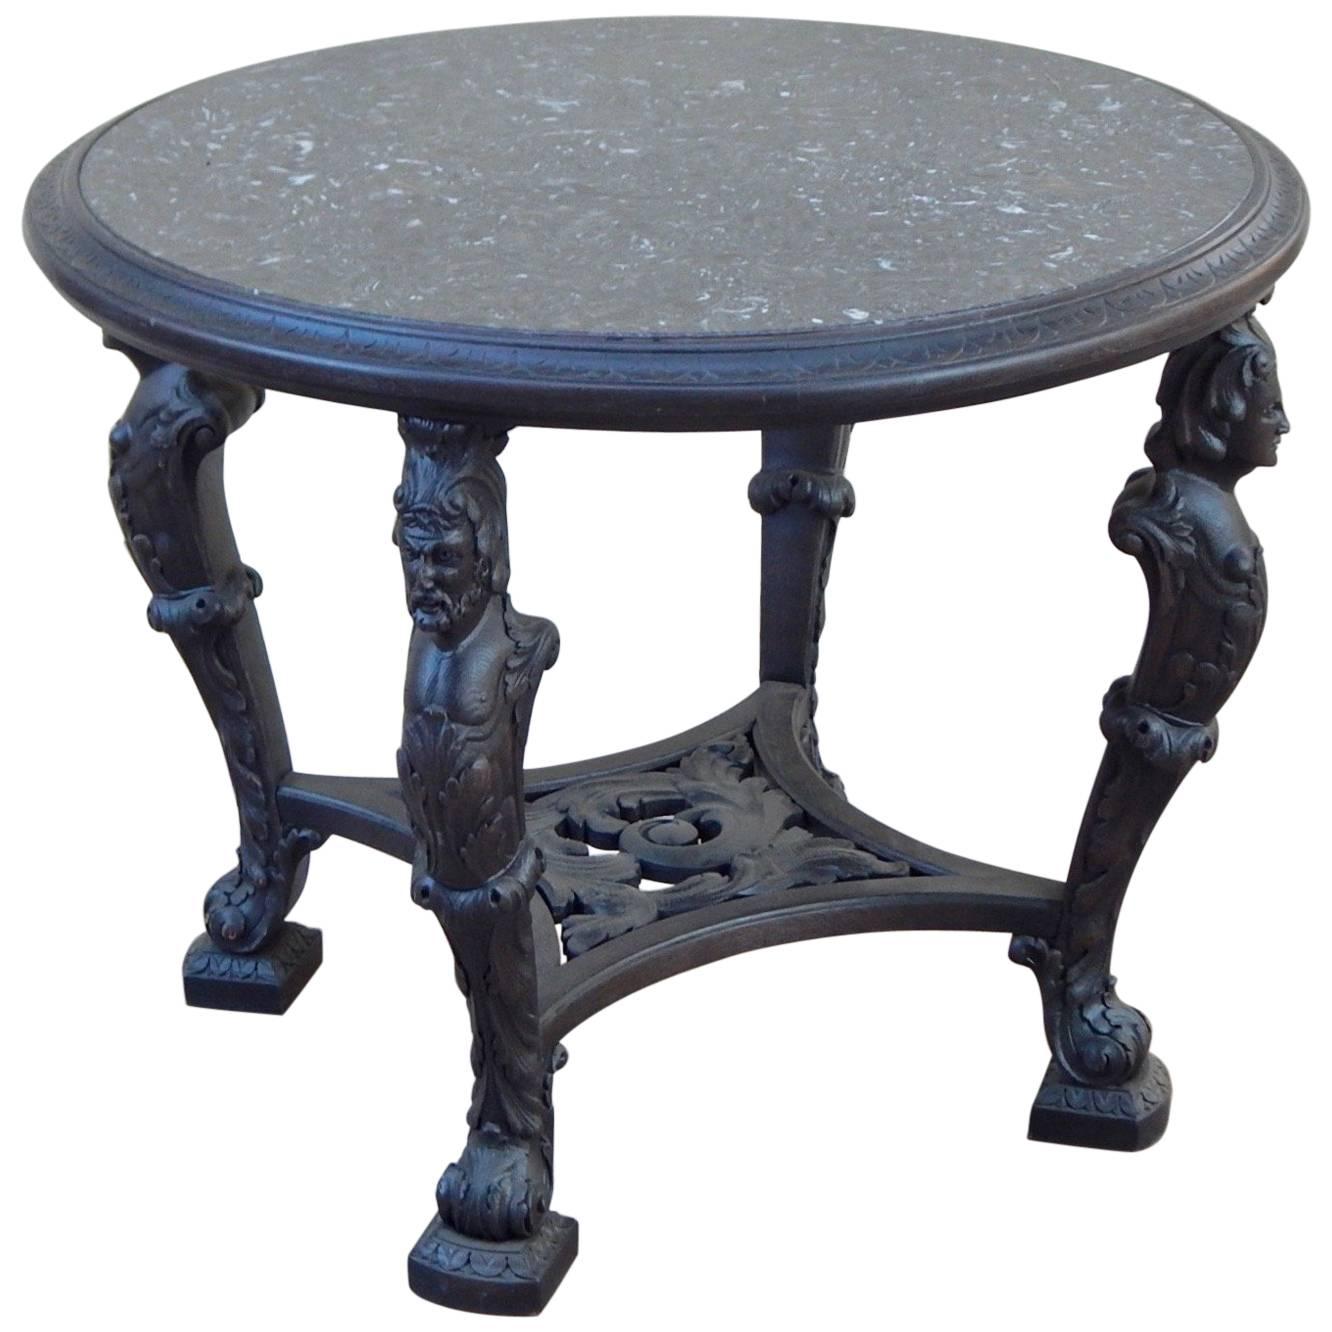 Swedish Gothic Revival Table with Figural Columns and Stone Top, circa 1920 For Sale